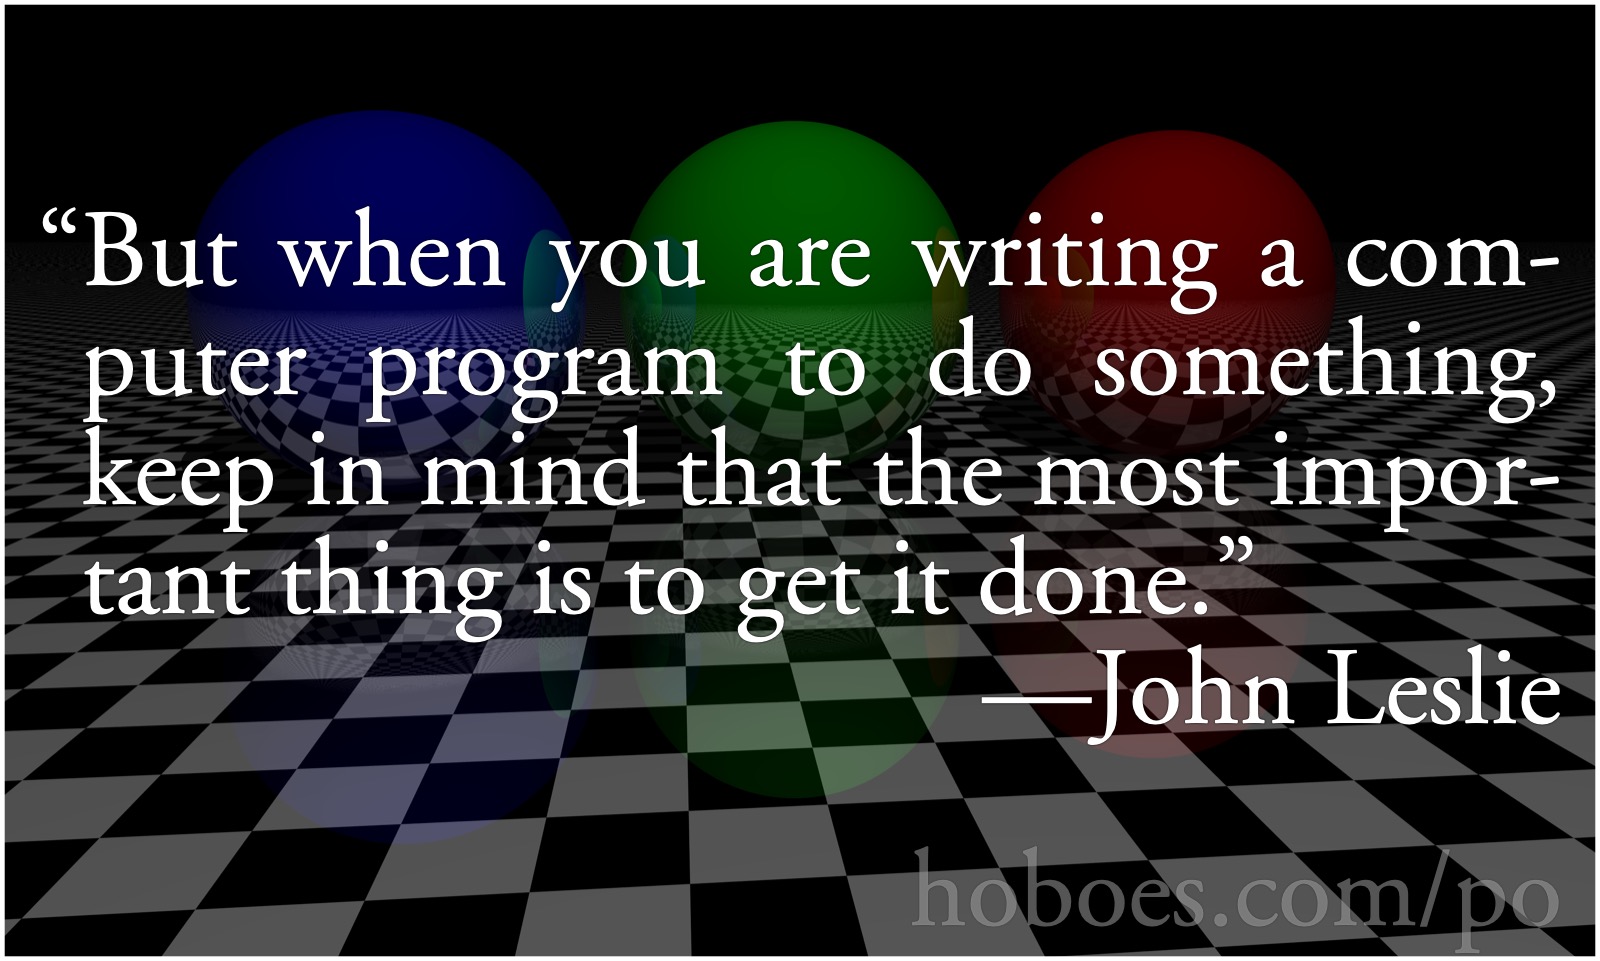 Get It Done: John Leslie: But when you are writing a computer program to do something, keep in mind that the most important thing is to get it done.; programming; planning; plans; editing; optimization